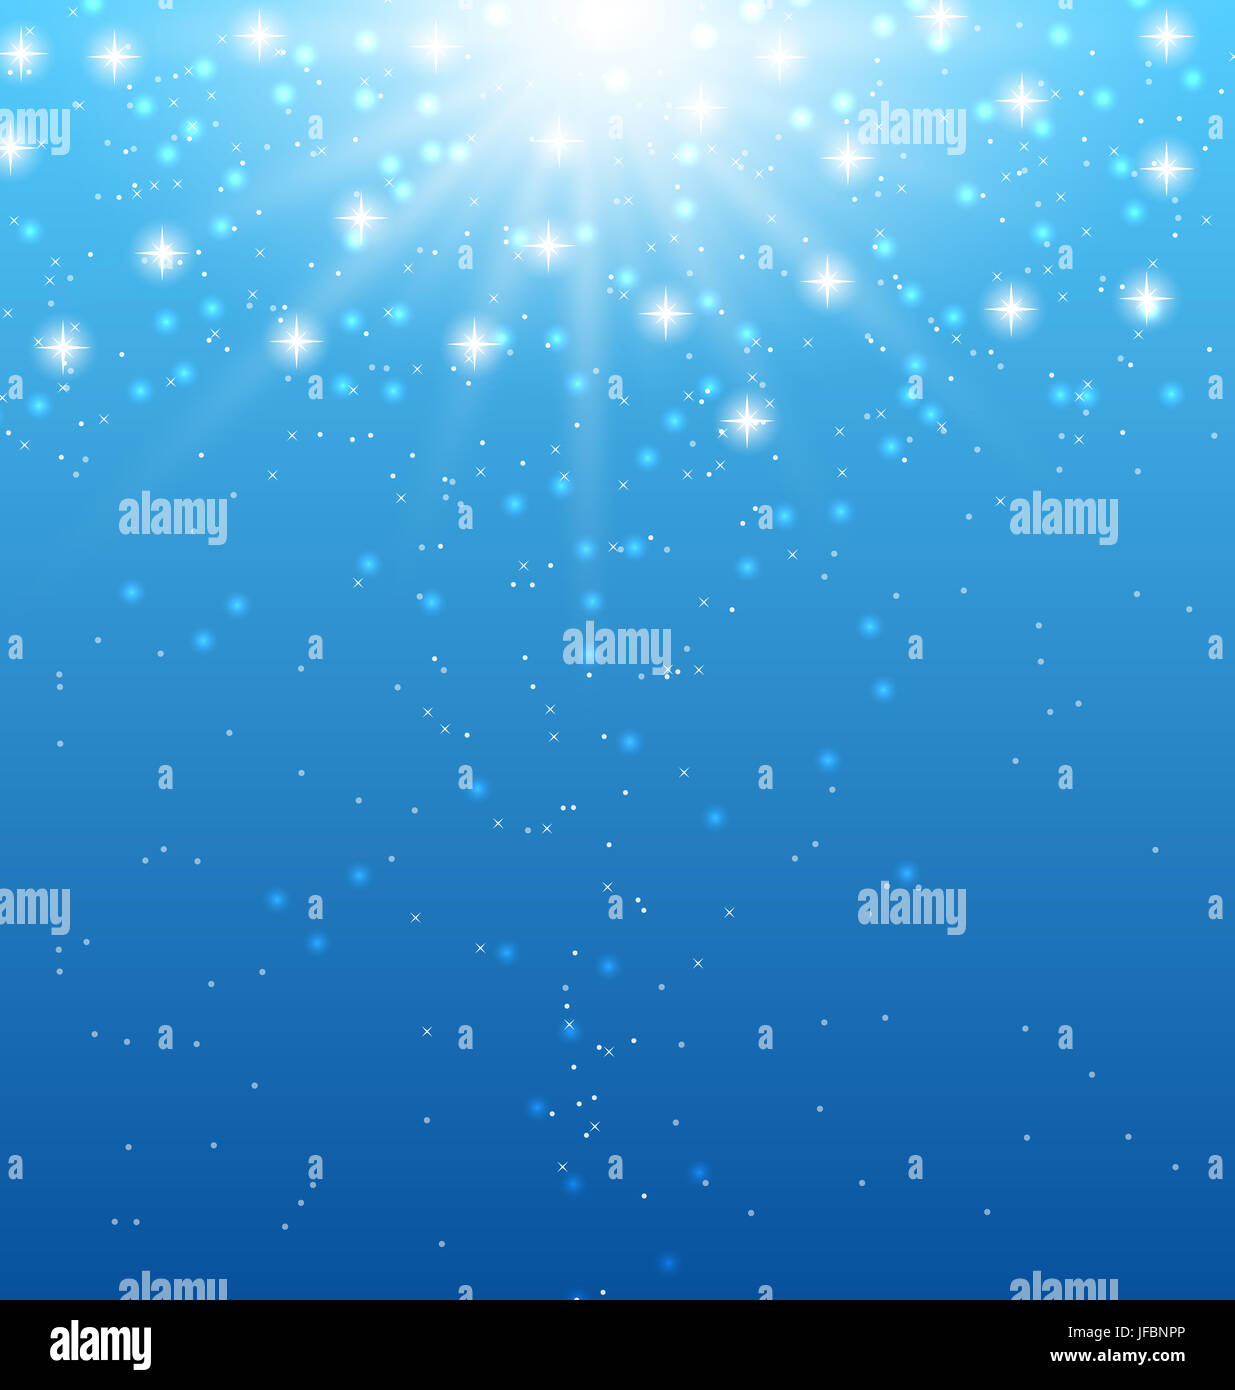 Illustration abstract blue background with sunbeams and shiny stars ...